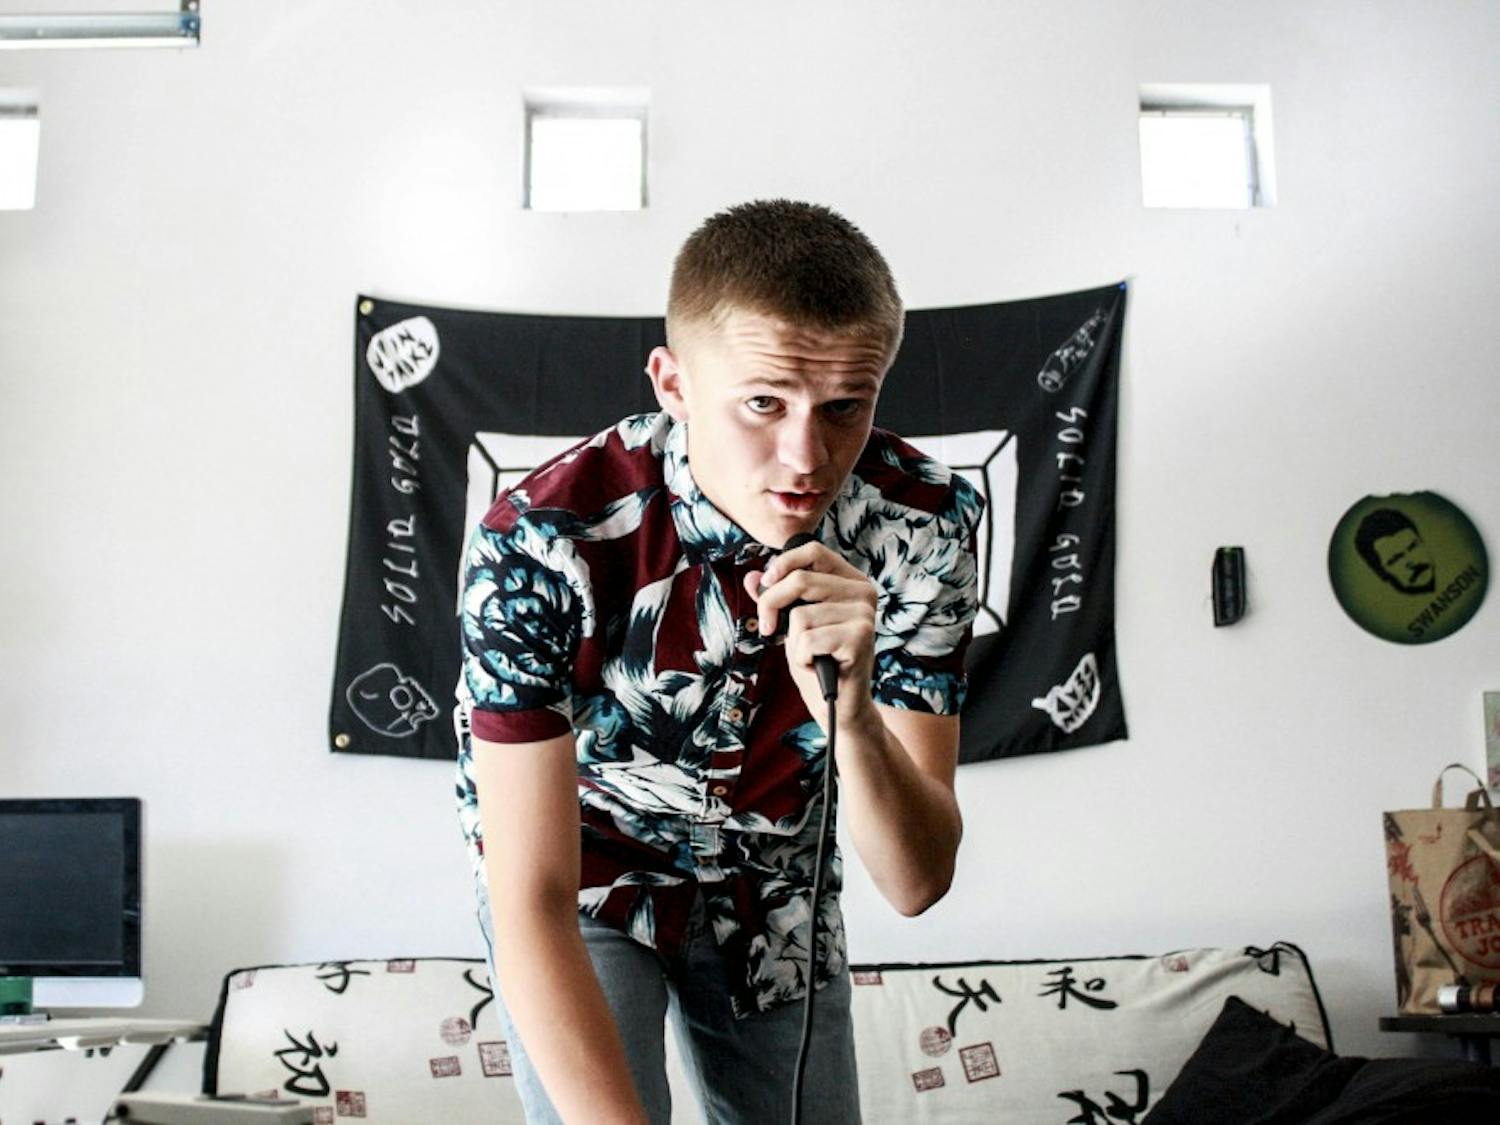 Young rap artist Matthew ?Vez? Chavez performs some of his rap lyrics during an interview on Aug. 18, 2017. Vez is a seventeen year old currently beginning his senior year of high school at Rio Rancho High School.
